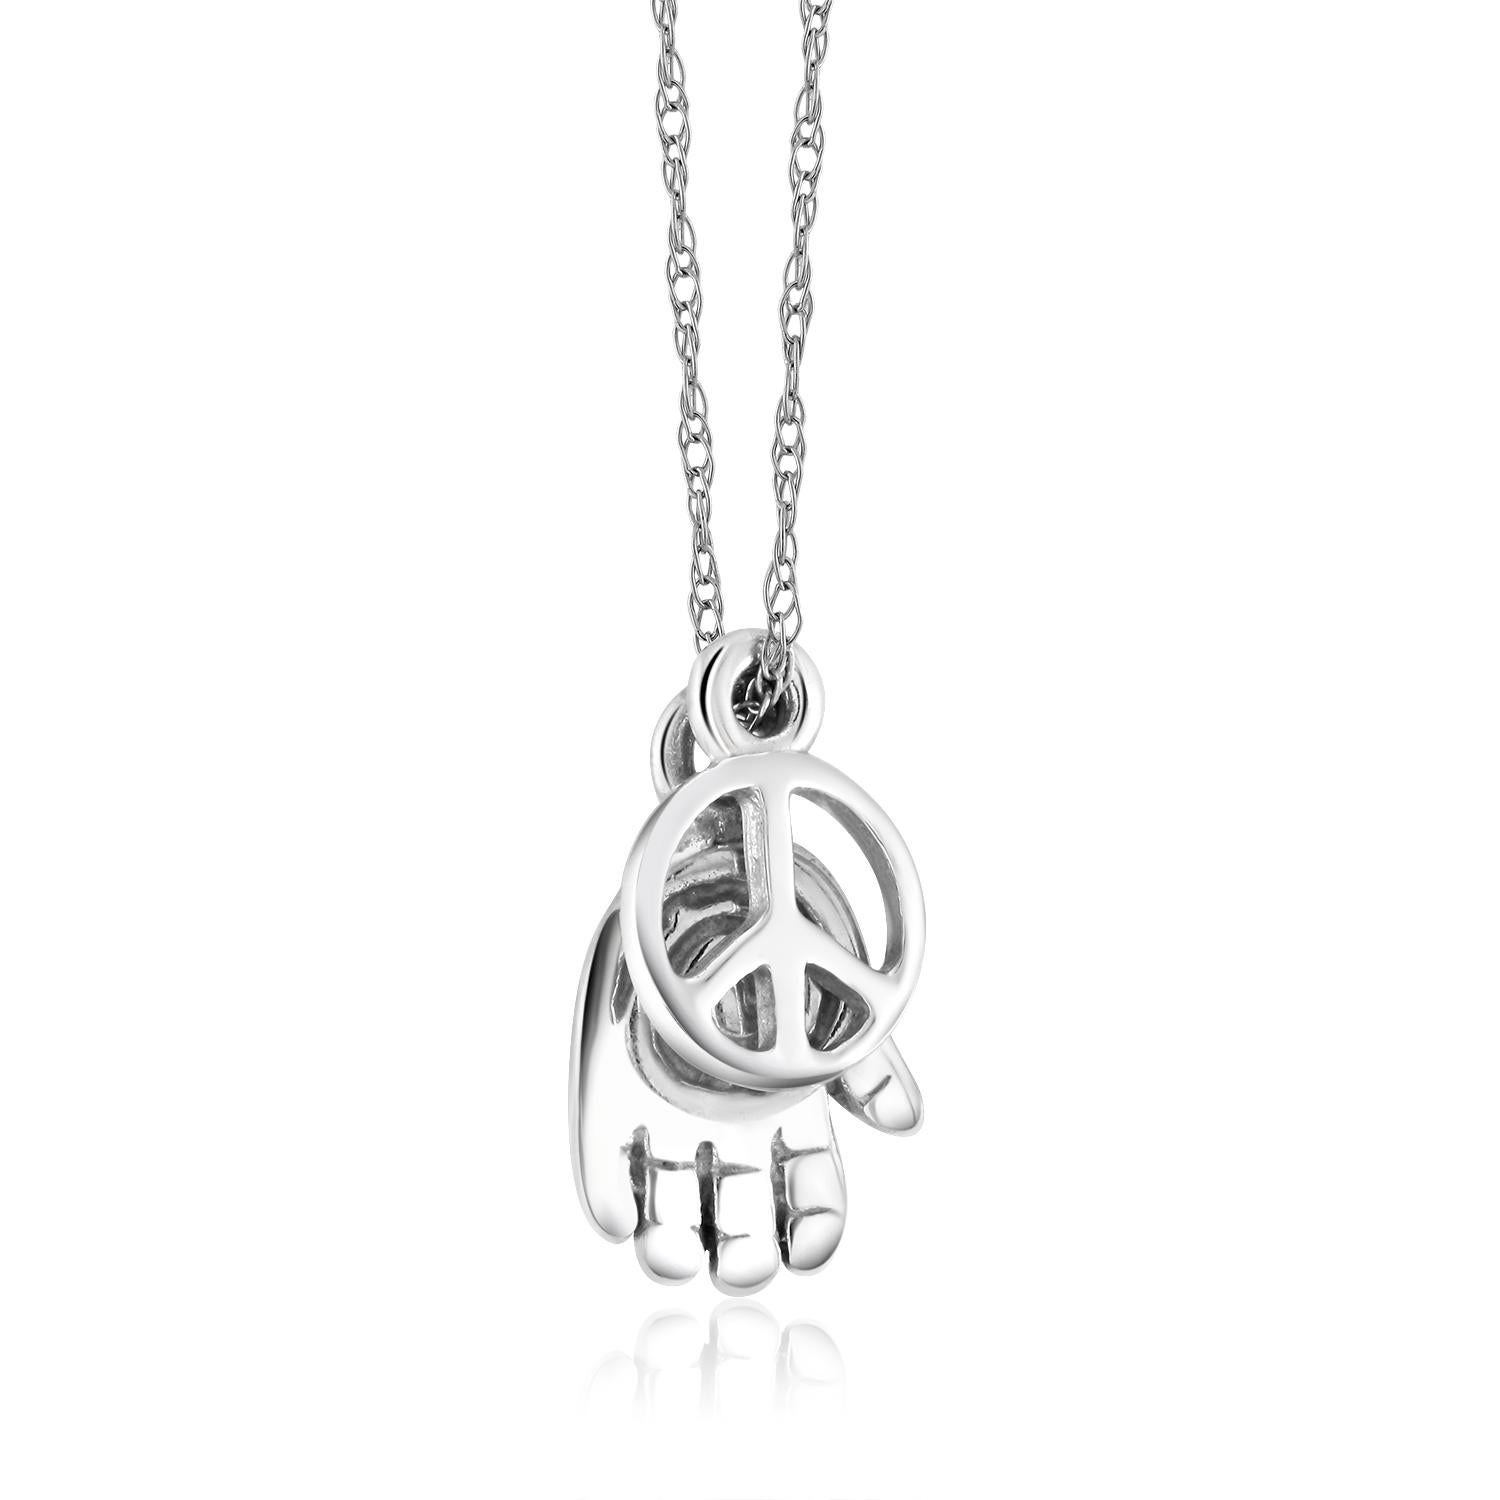 Contemporary White Gold Luck and Peace Two Symbol Charms Diamond Pendant Necklace